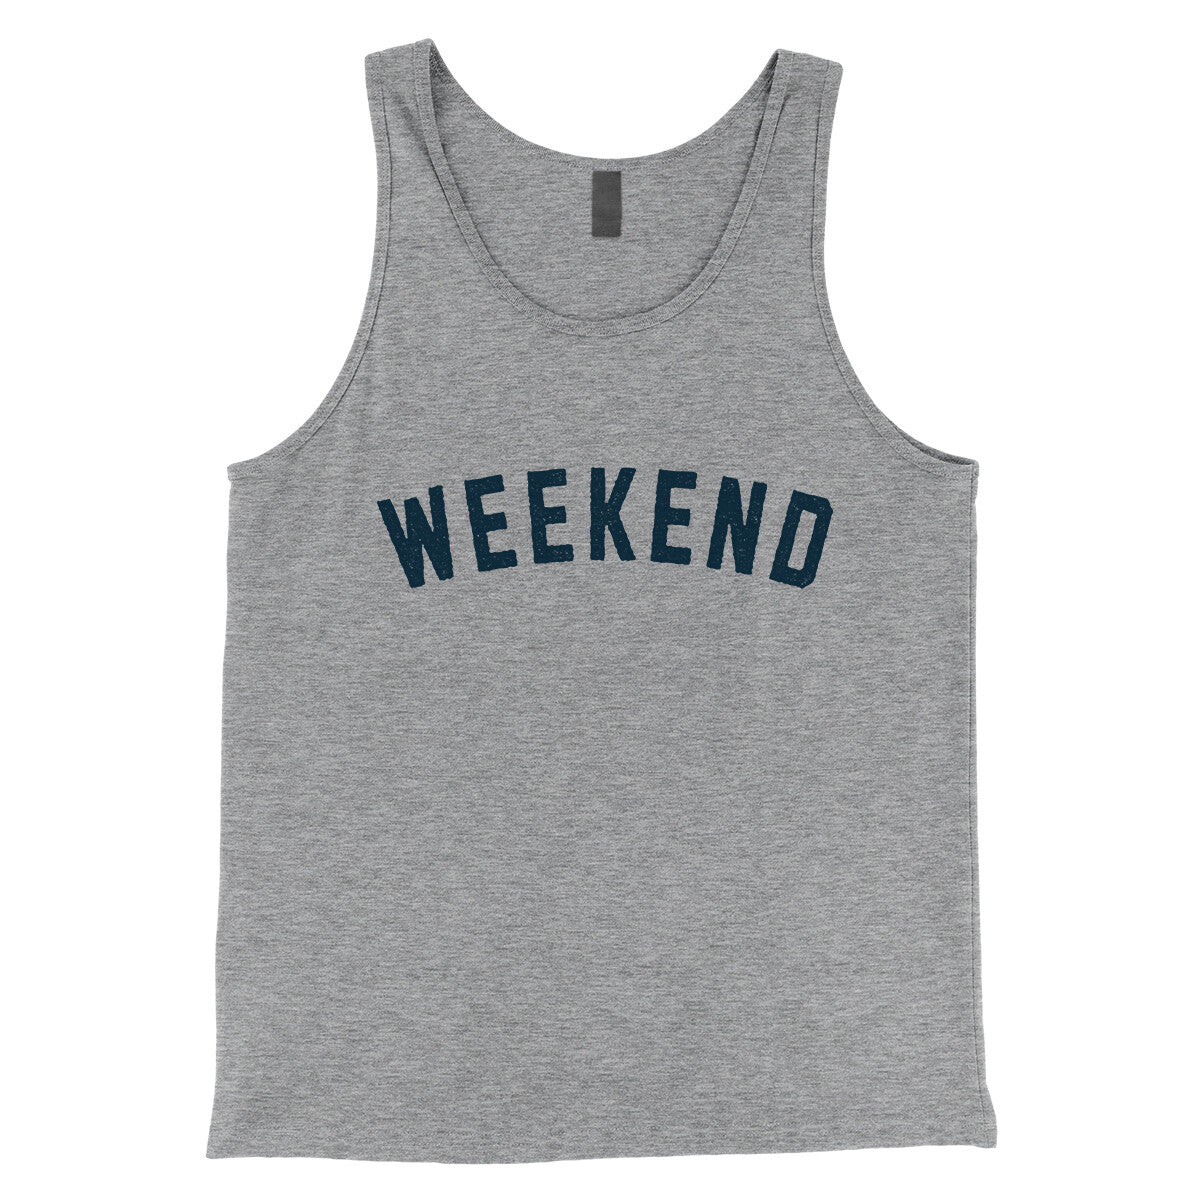 Weekend in Athletic Heather Color